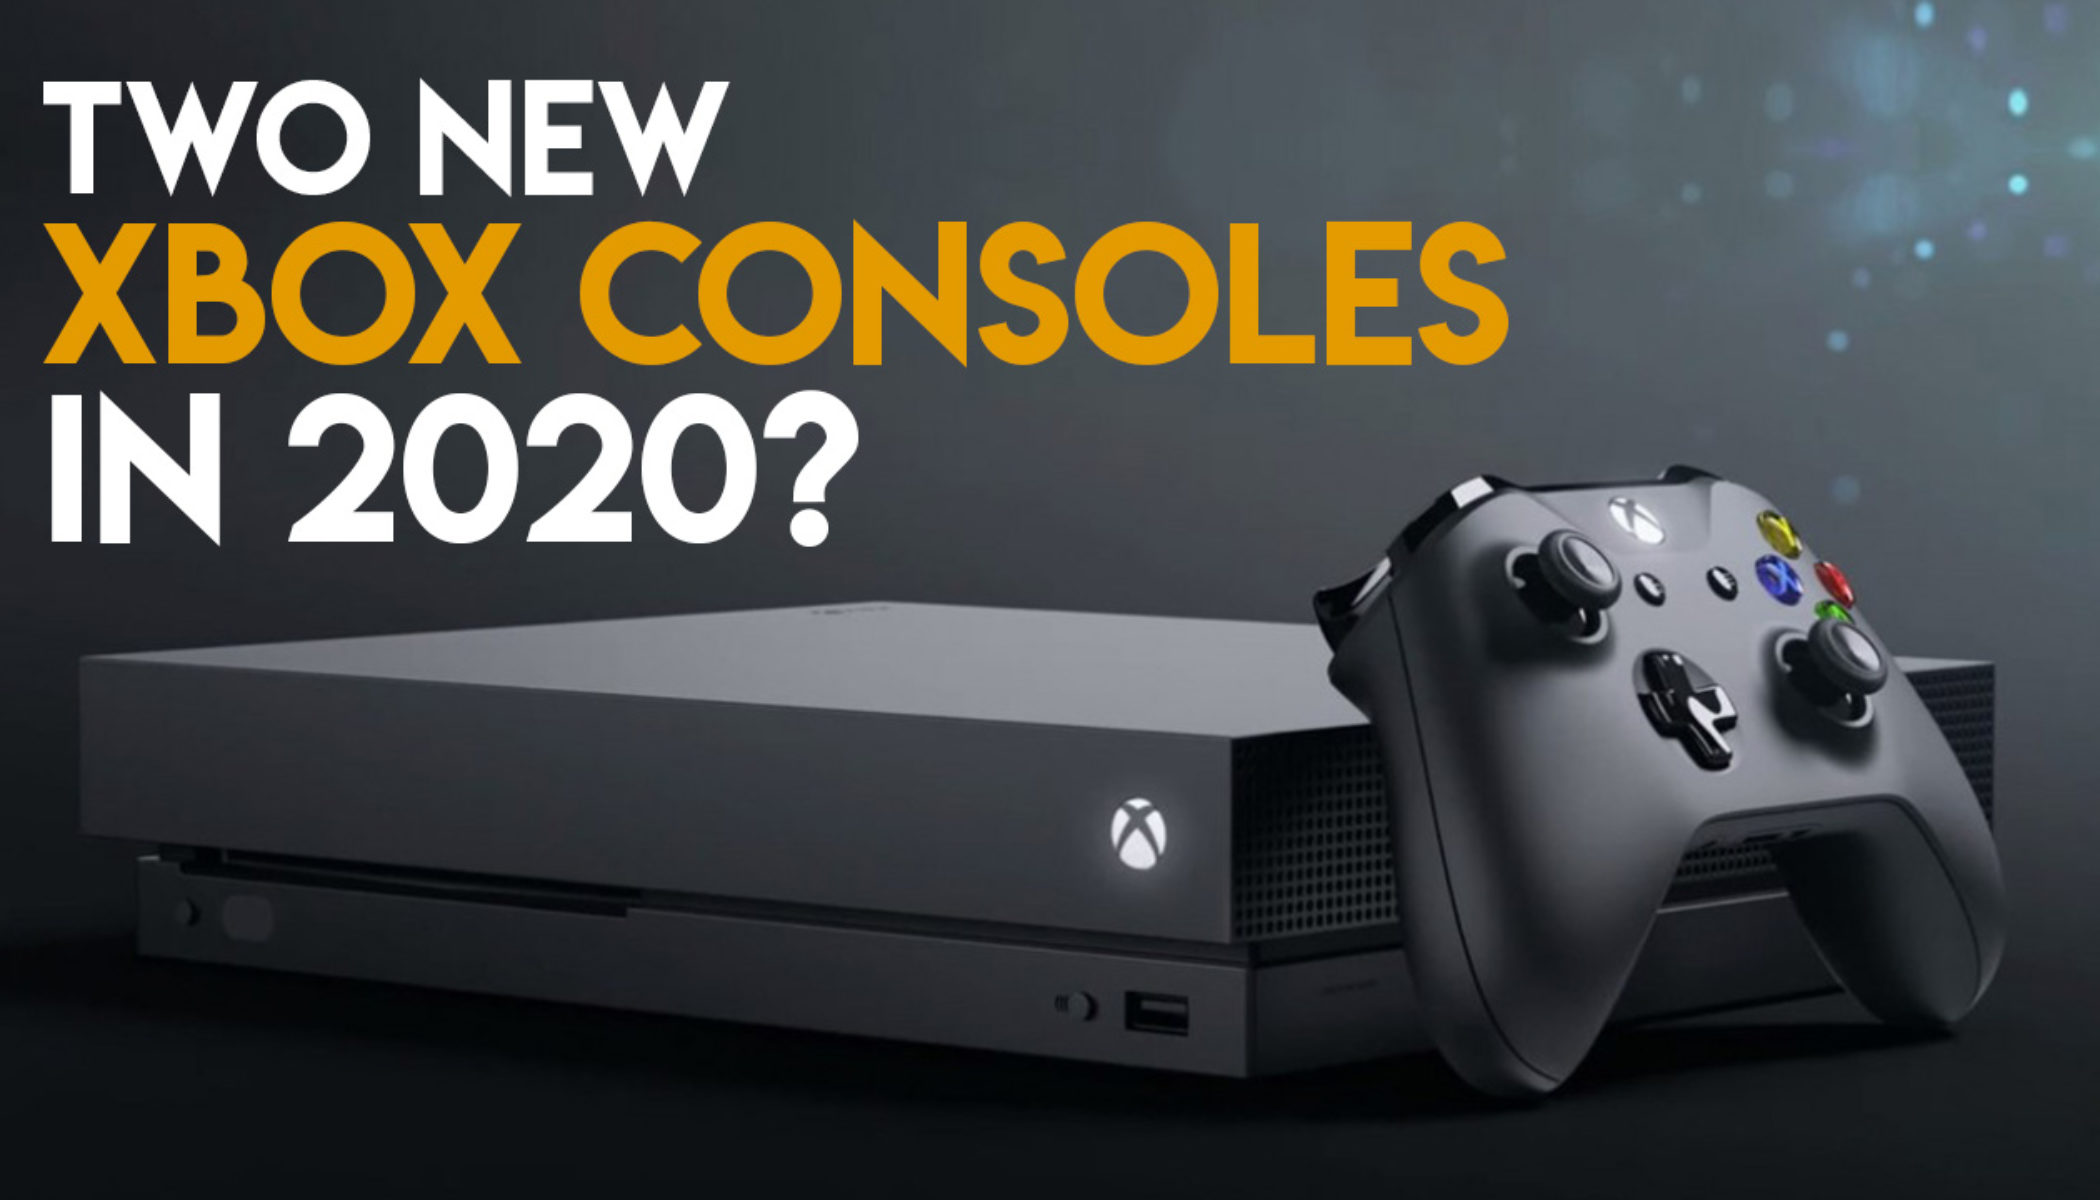 what is the new xbox system coming out